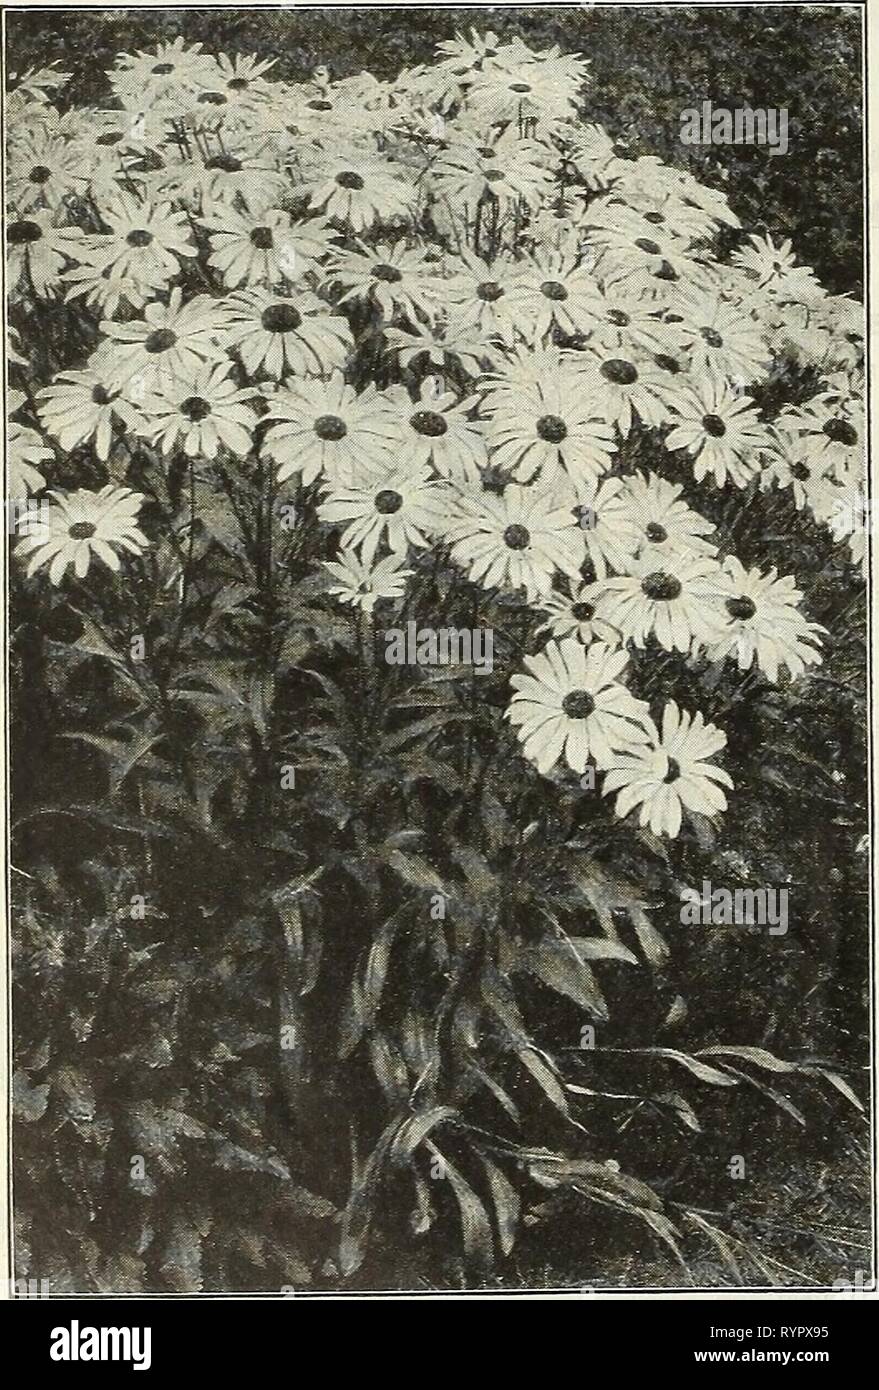 Dreer's midsummer list 1927 (1927) Dreer's midsummer list 1927 . dreersmidsummerl1927henr Year: 1927  Dreer's Prize Dwarf Cineraria V :o    Shasta Daisy Alaska Chrysanthemum (Shasta and Moonpenny Daisies) PER PKT. 1946 Maximum King Edward VII (Moonpenny Daisy). Considered the finest of all, with flowers of extraordi- nary size, of purest white, perfect form, and exceedingly free-flowering. J oz.,. 30 cts $0 10 1948 Shasta Daiy Alaska. A splendid hardy perennial variety with flowers rarely less than five inches across, of the purest glistening white, with broad overlapping petals, and borne on Stock Photo